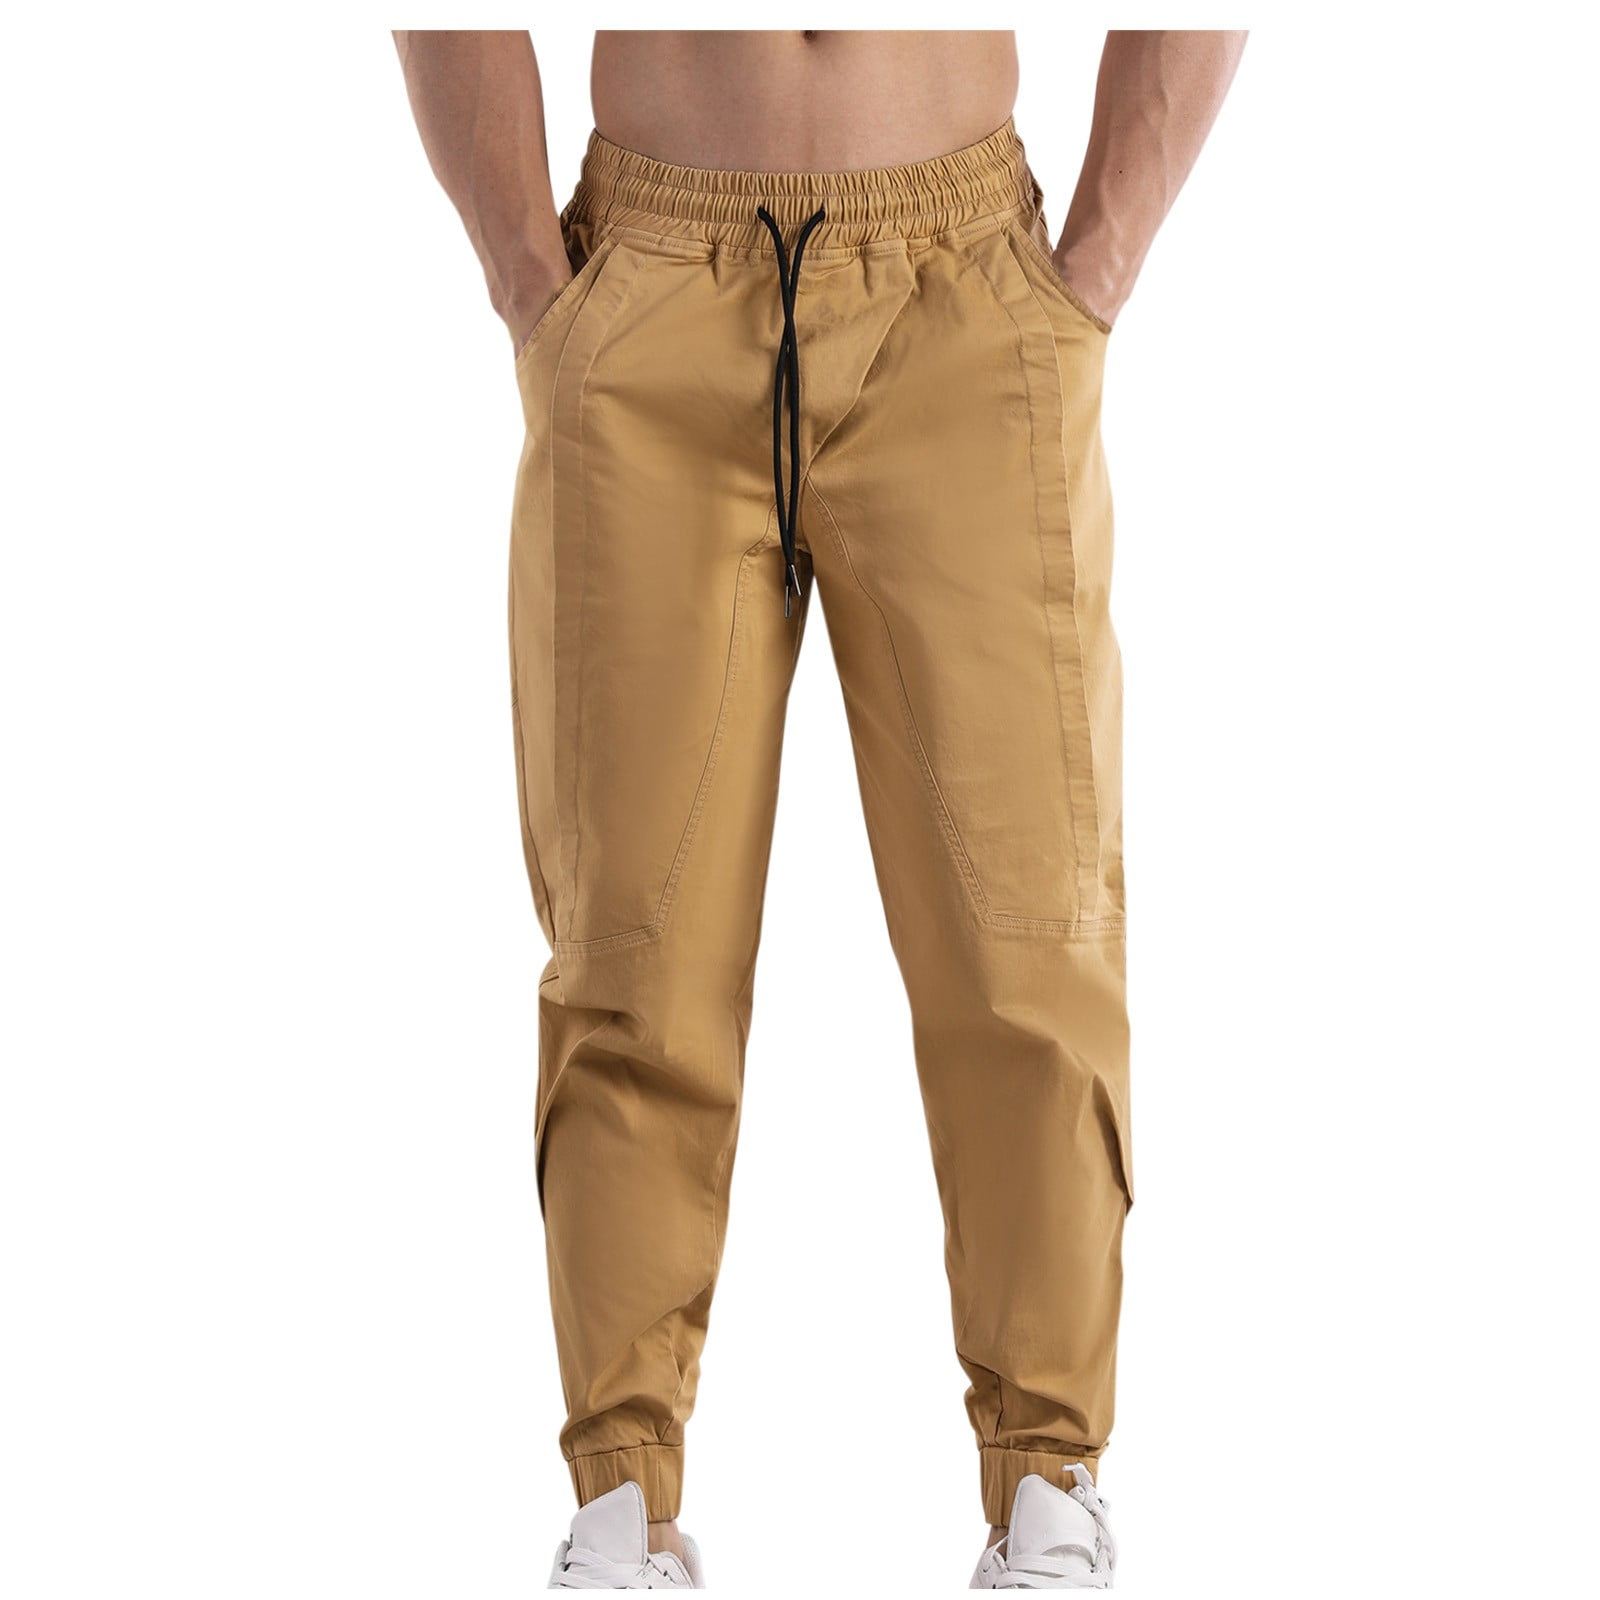 Dovford Mens Drawstring Joggers Pants - Casual Gym Workout Track Pants ...